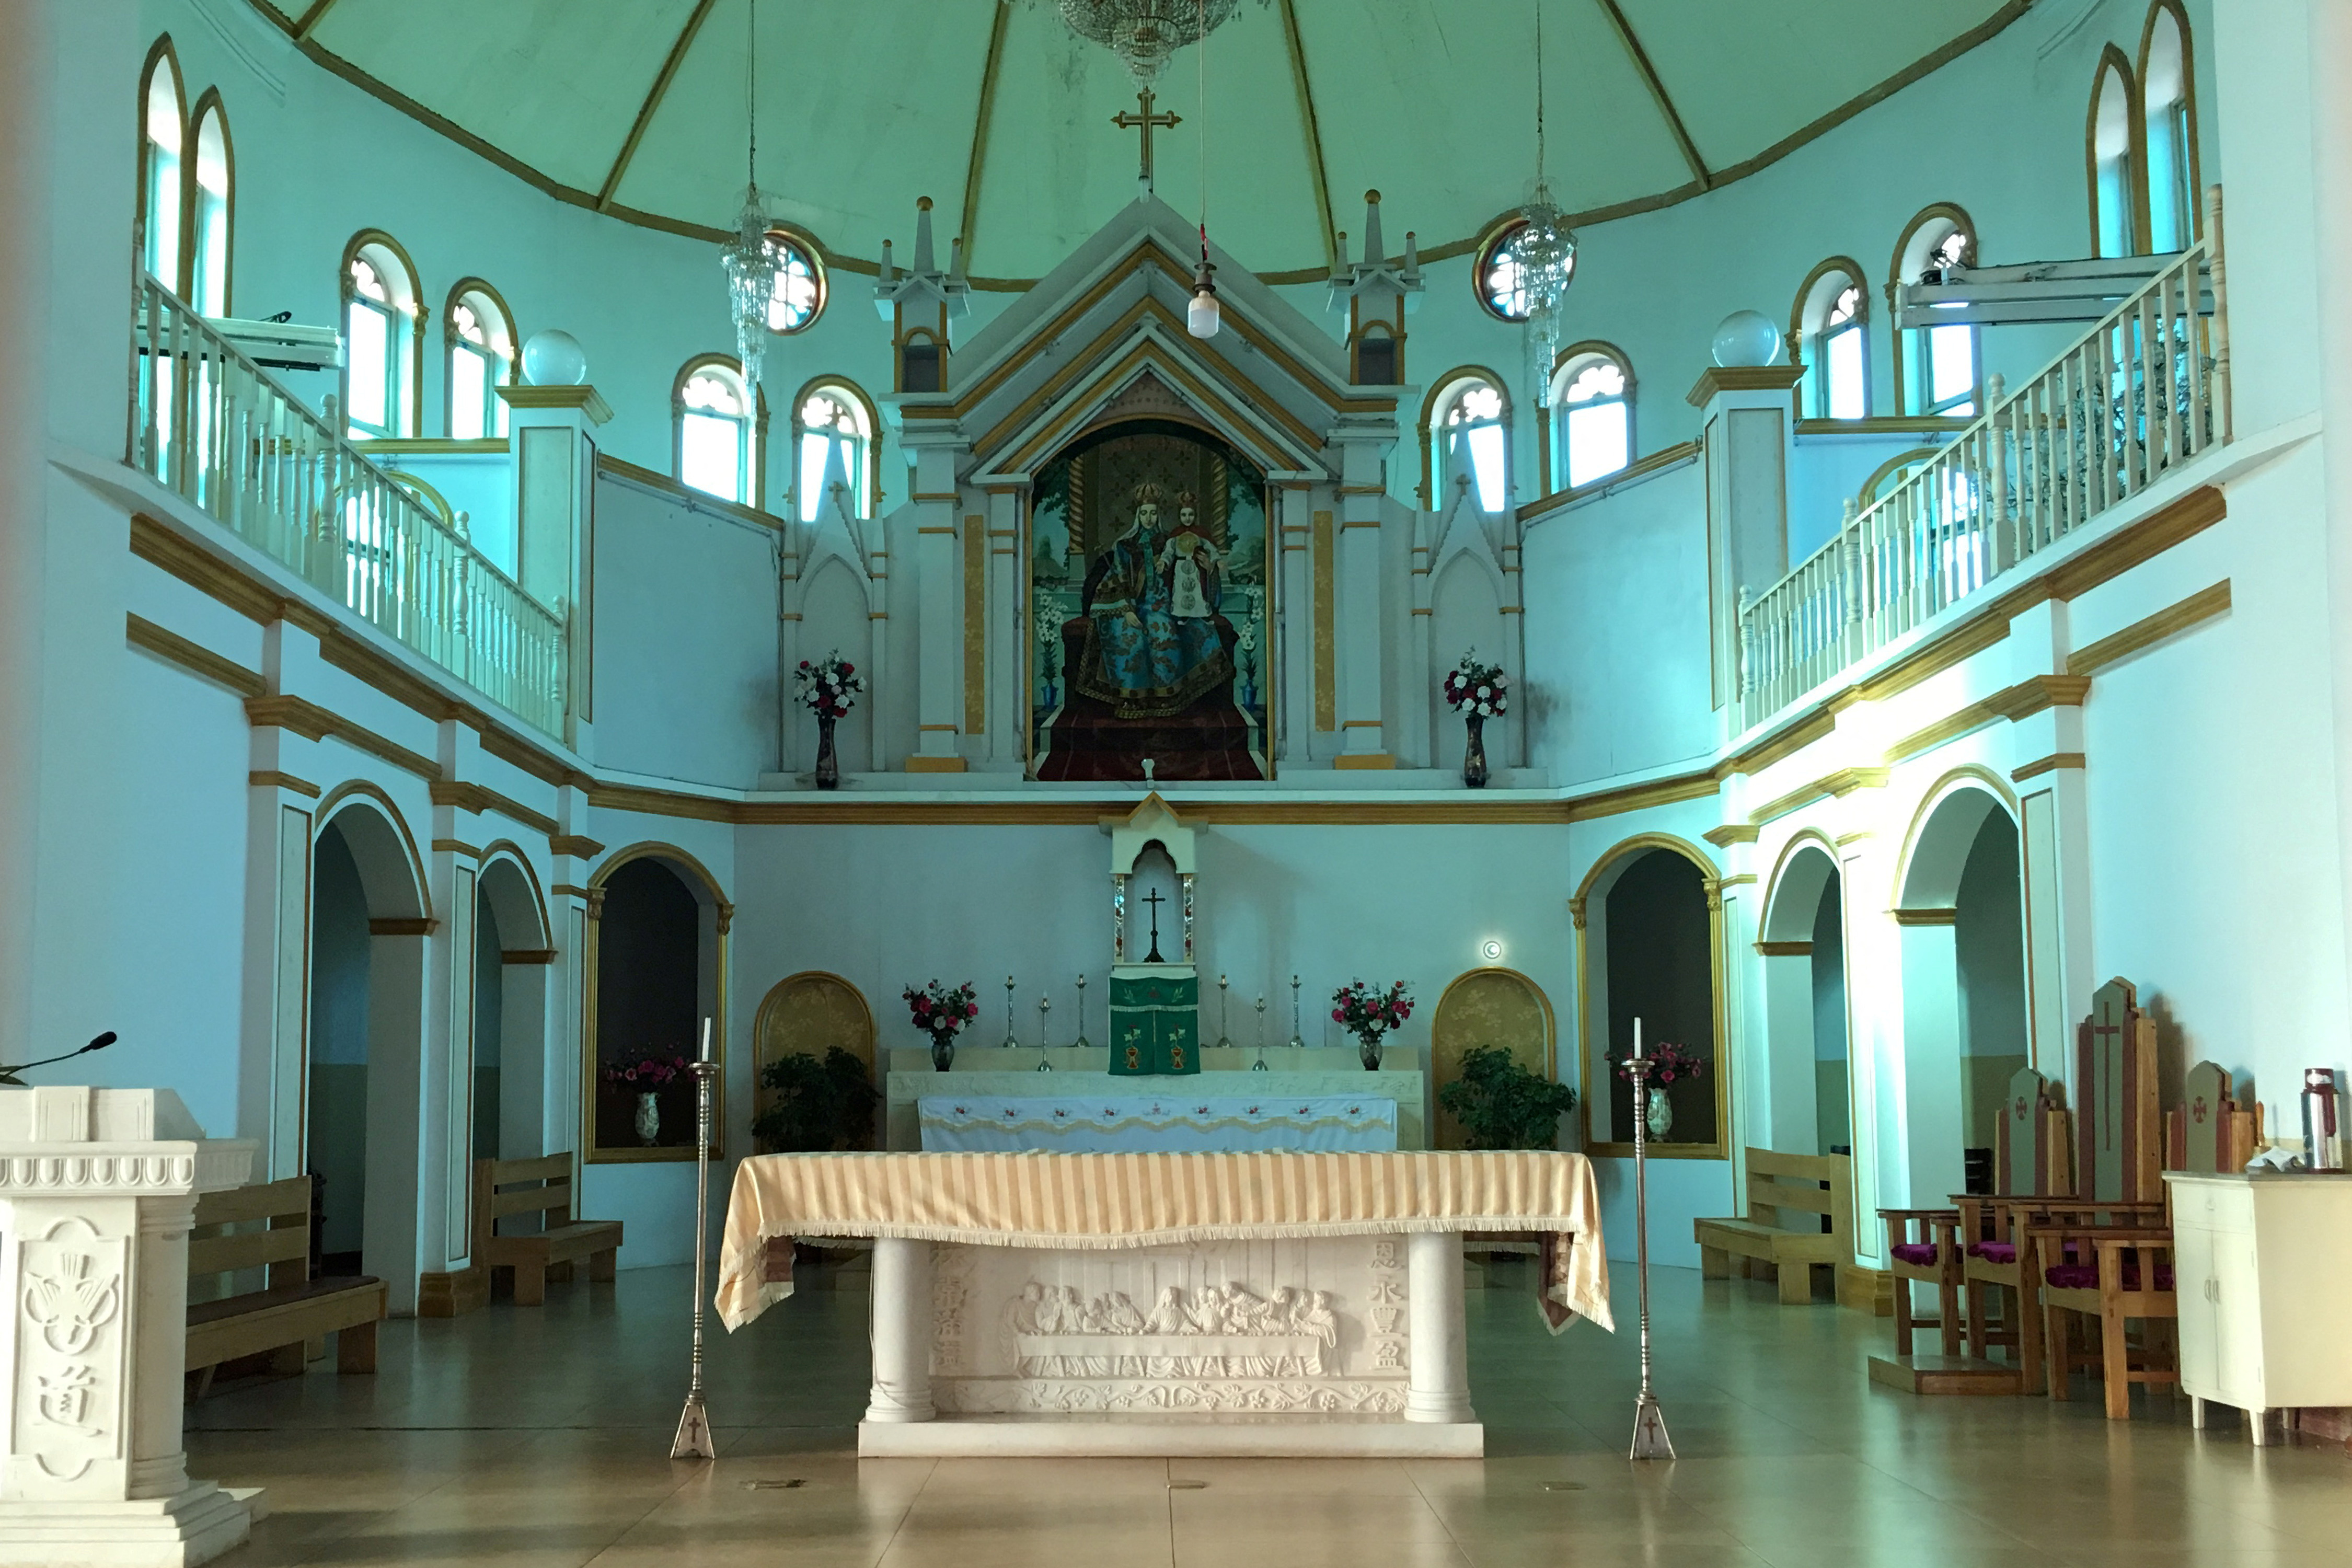 The altar and a painting of the Virgin Mary, known locally as Our Lady of China, are seen at Our Lady of China Catholic Church in Donglu village